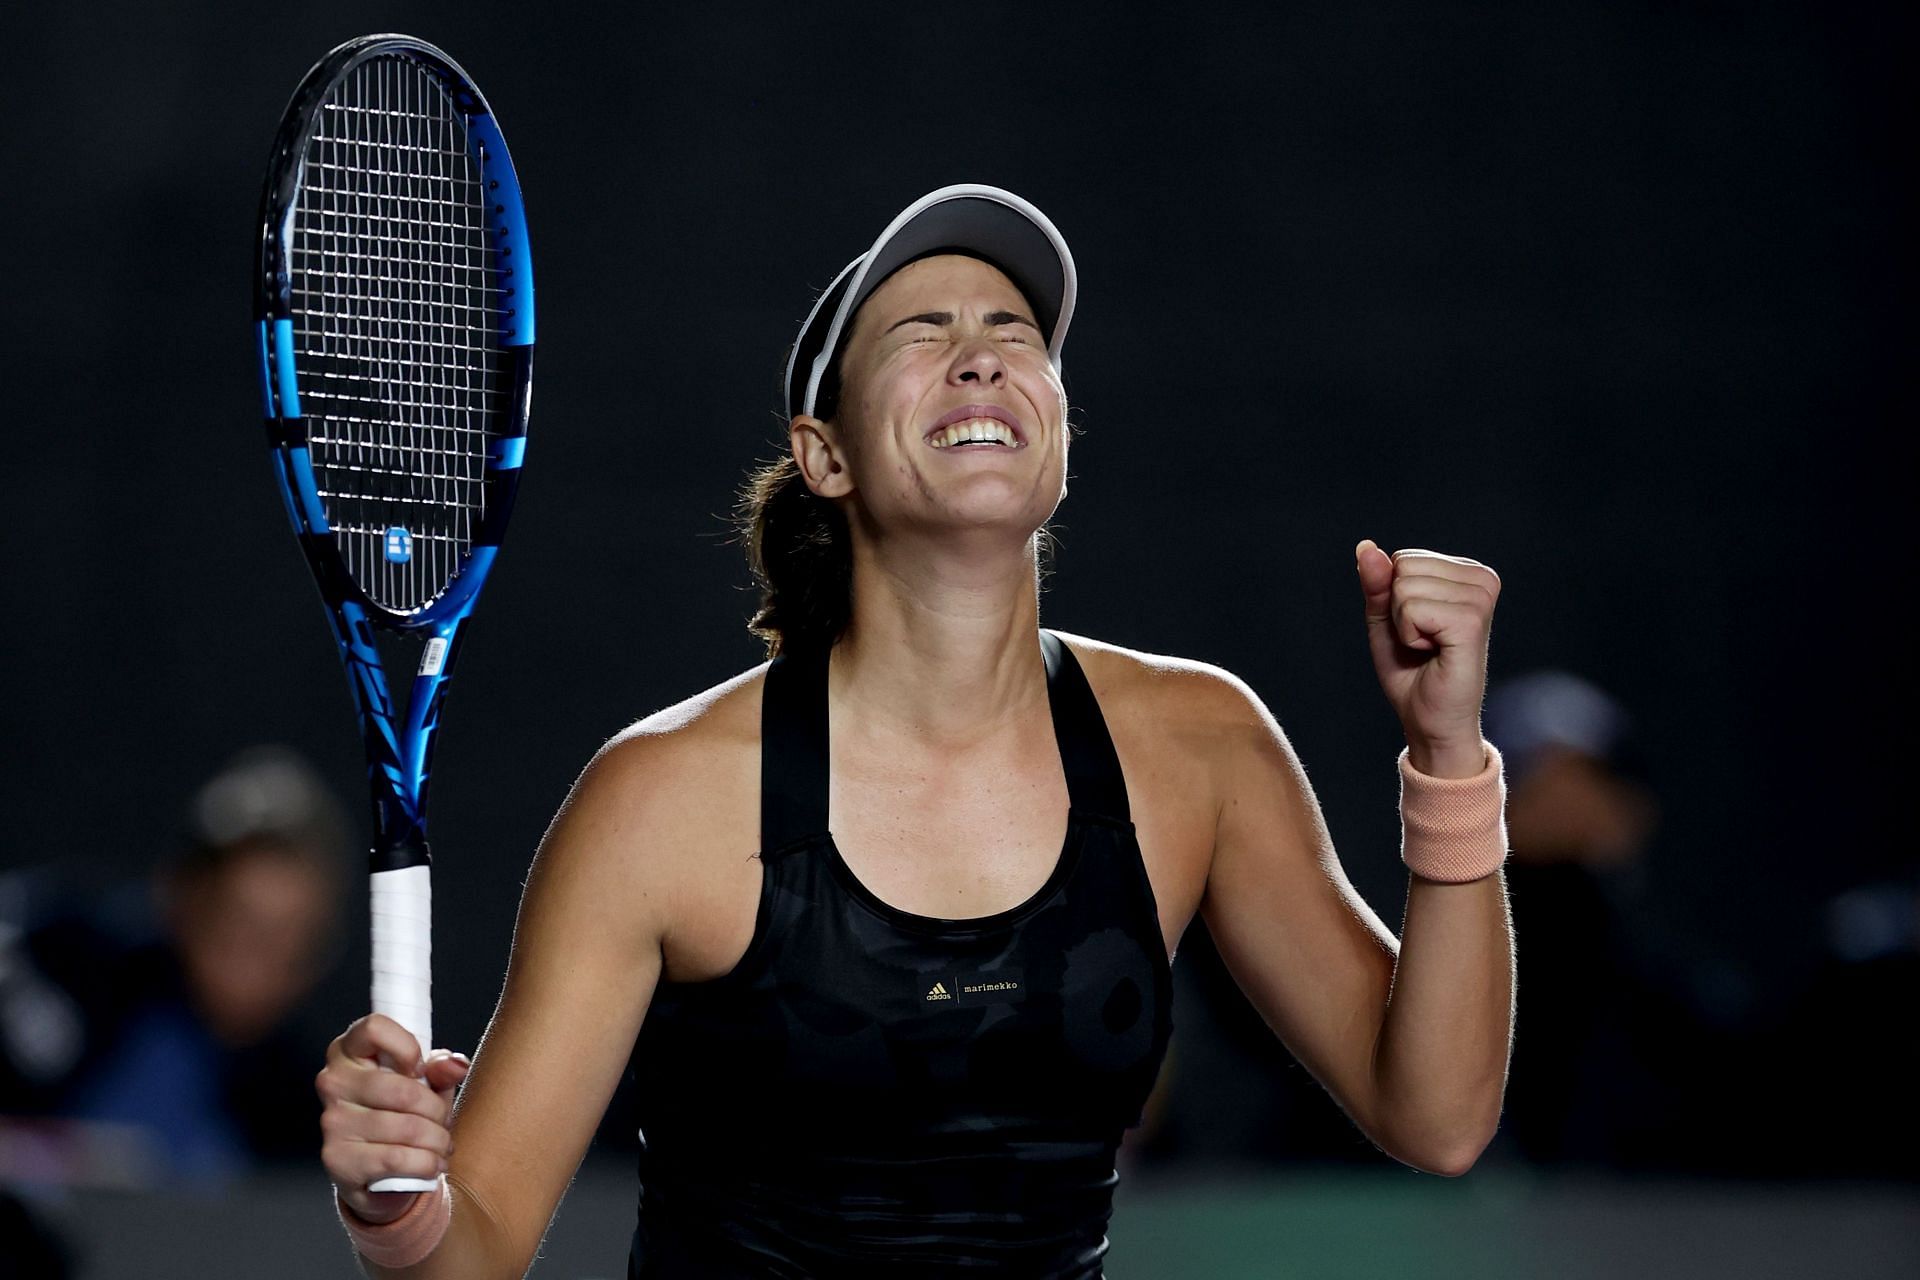 Garbine Muguruza qualified for the knockouts with her latest win.